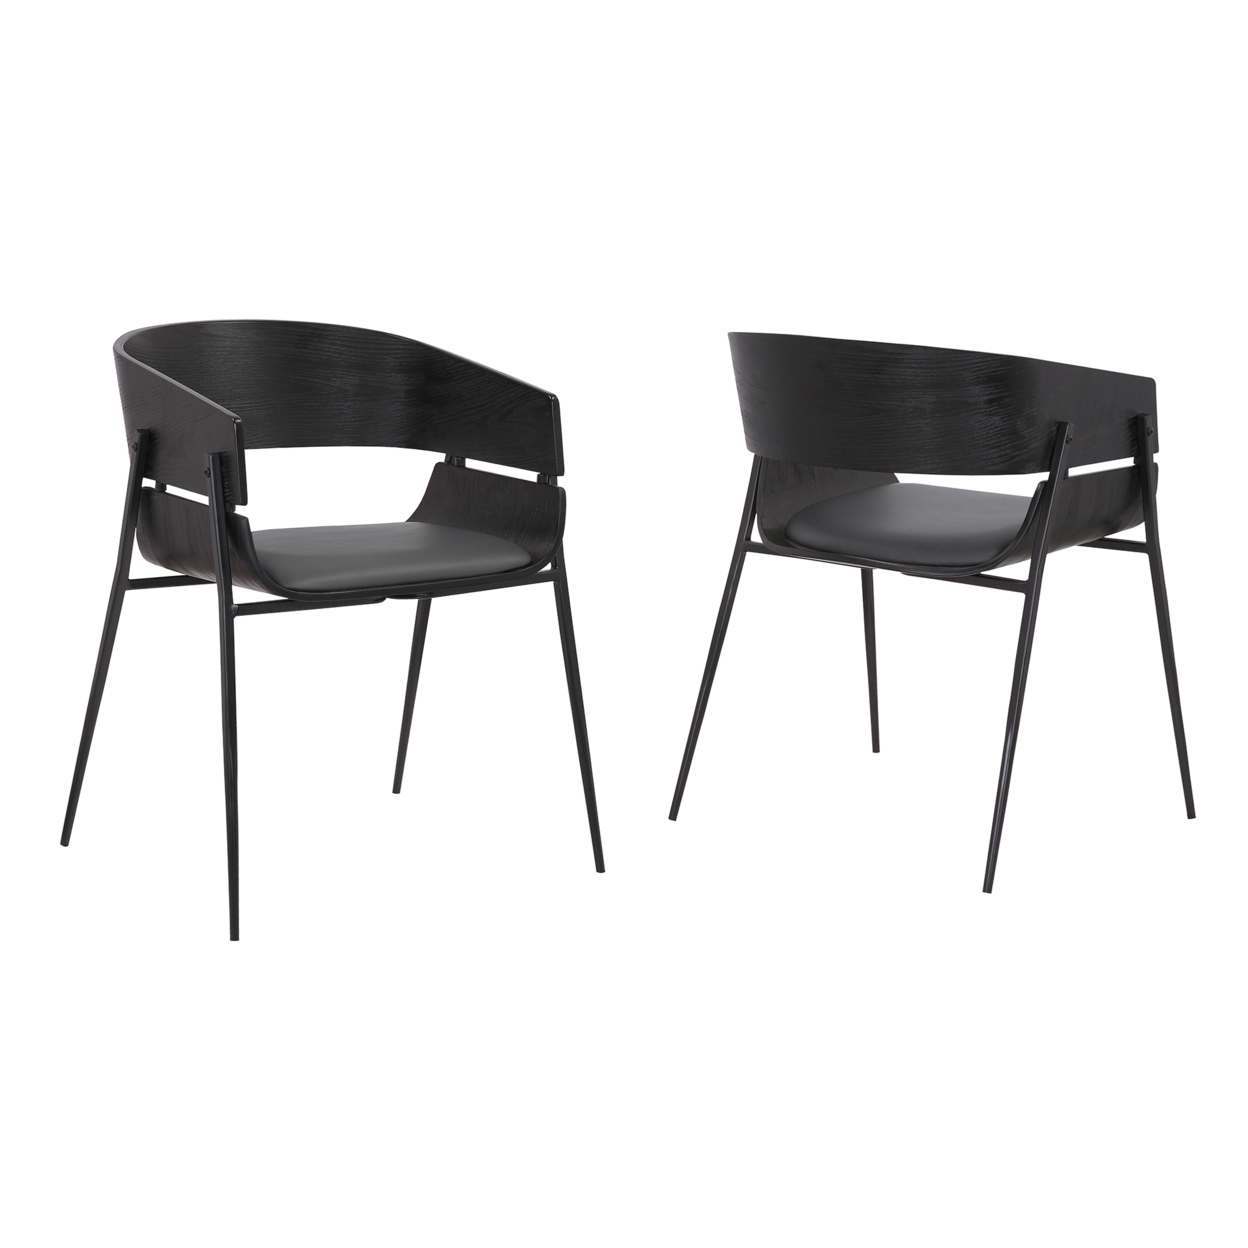 18.5 Inches Round Back Leatherette Dining Chair, Set Of 2, Black- Saltoro Sherpi